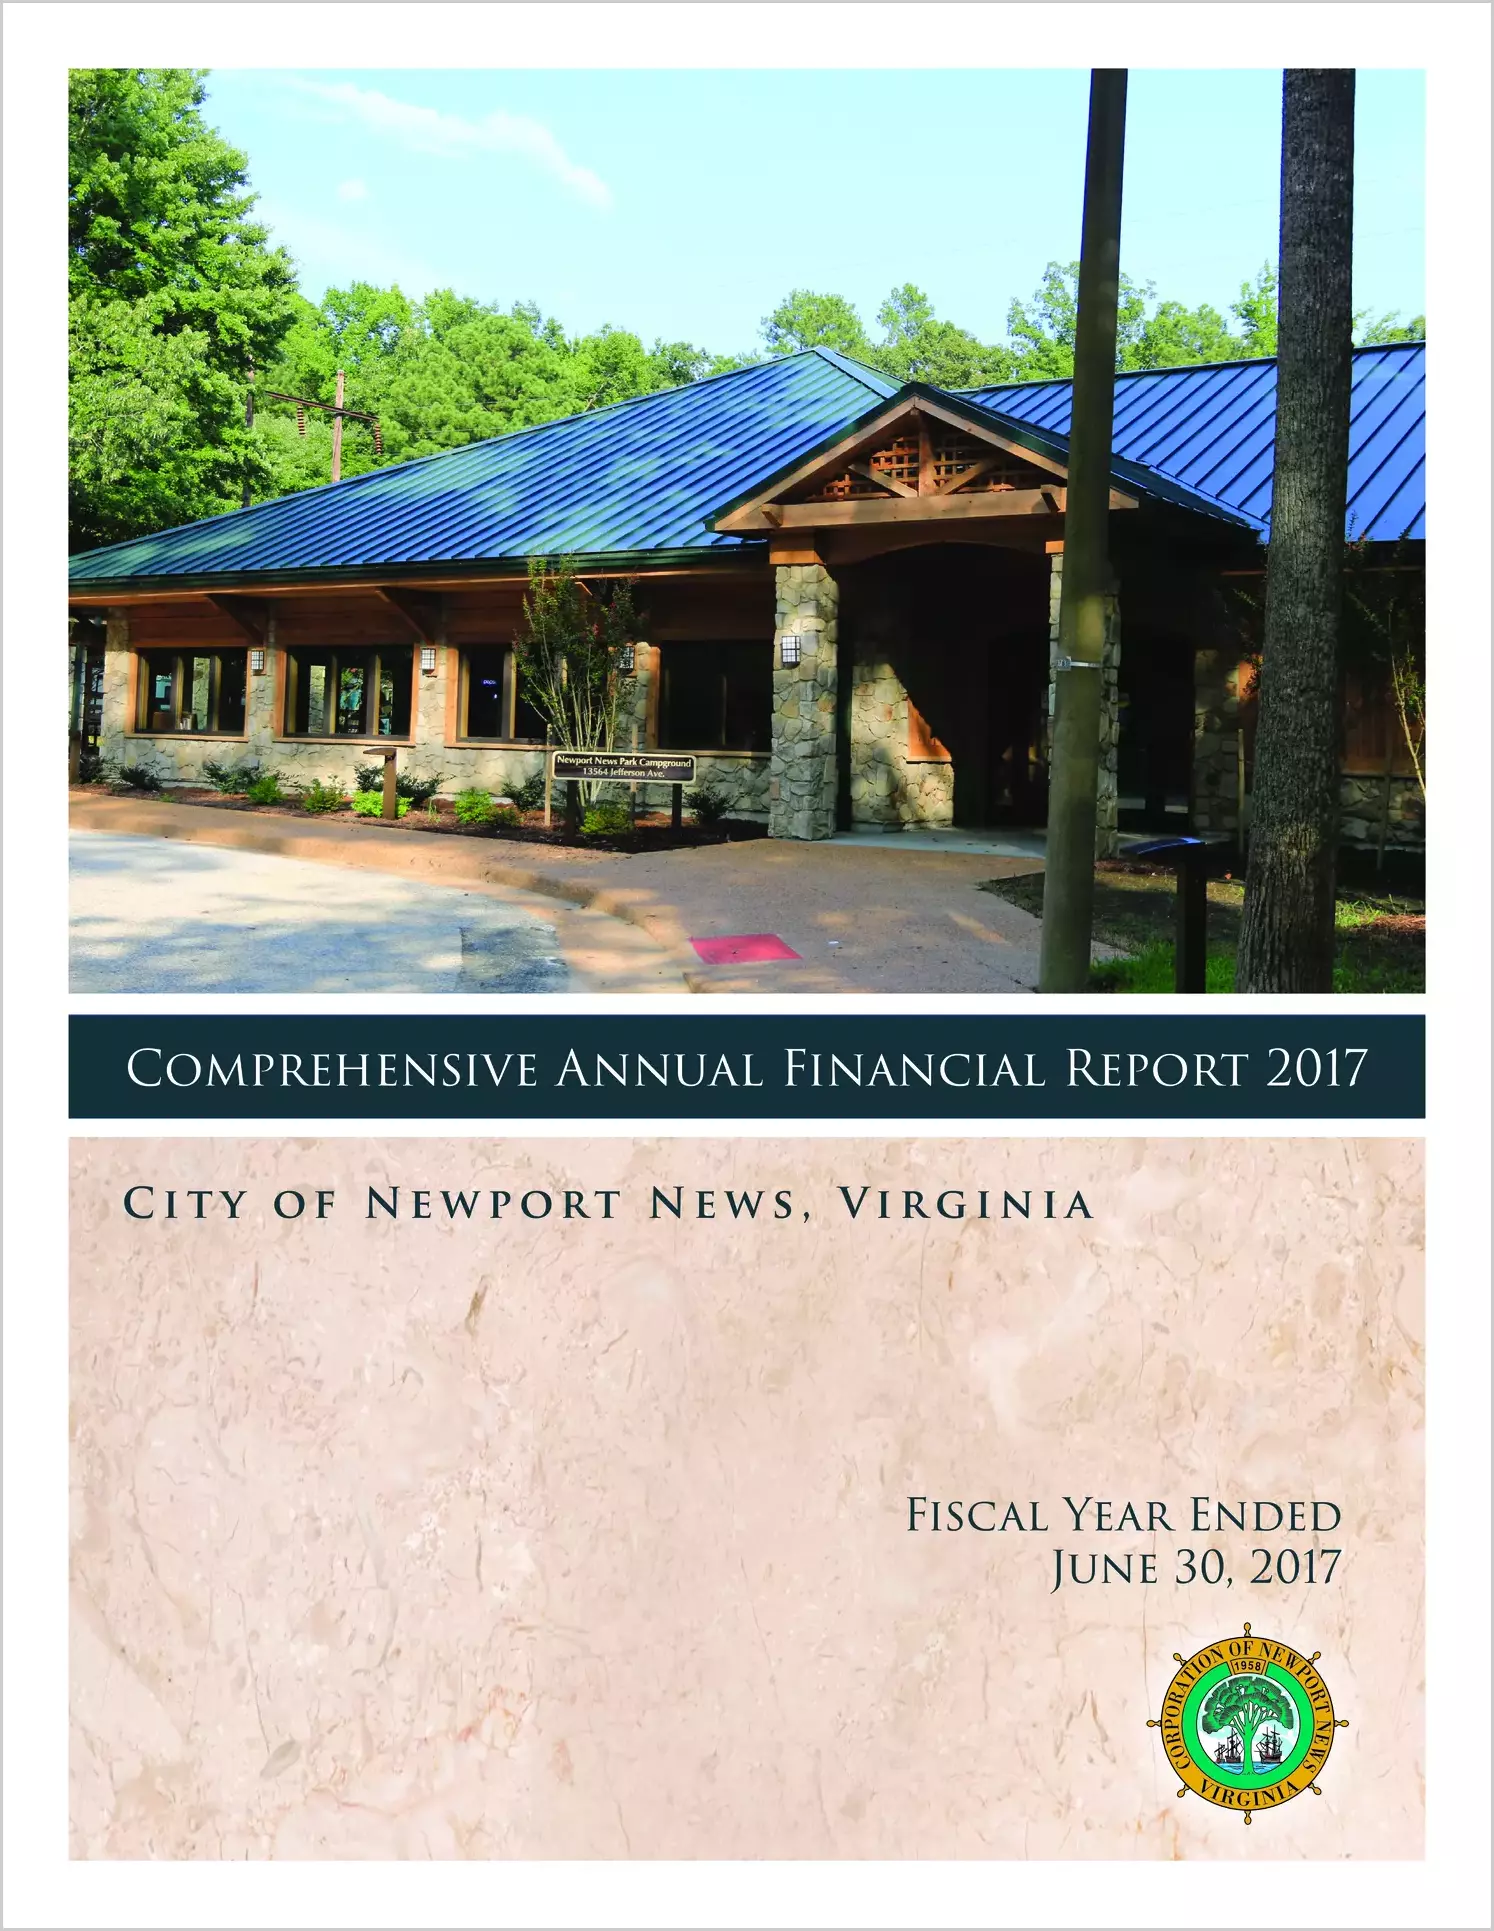 2017 Annual Financial Report for City of Newport News